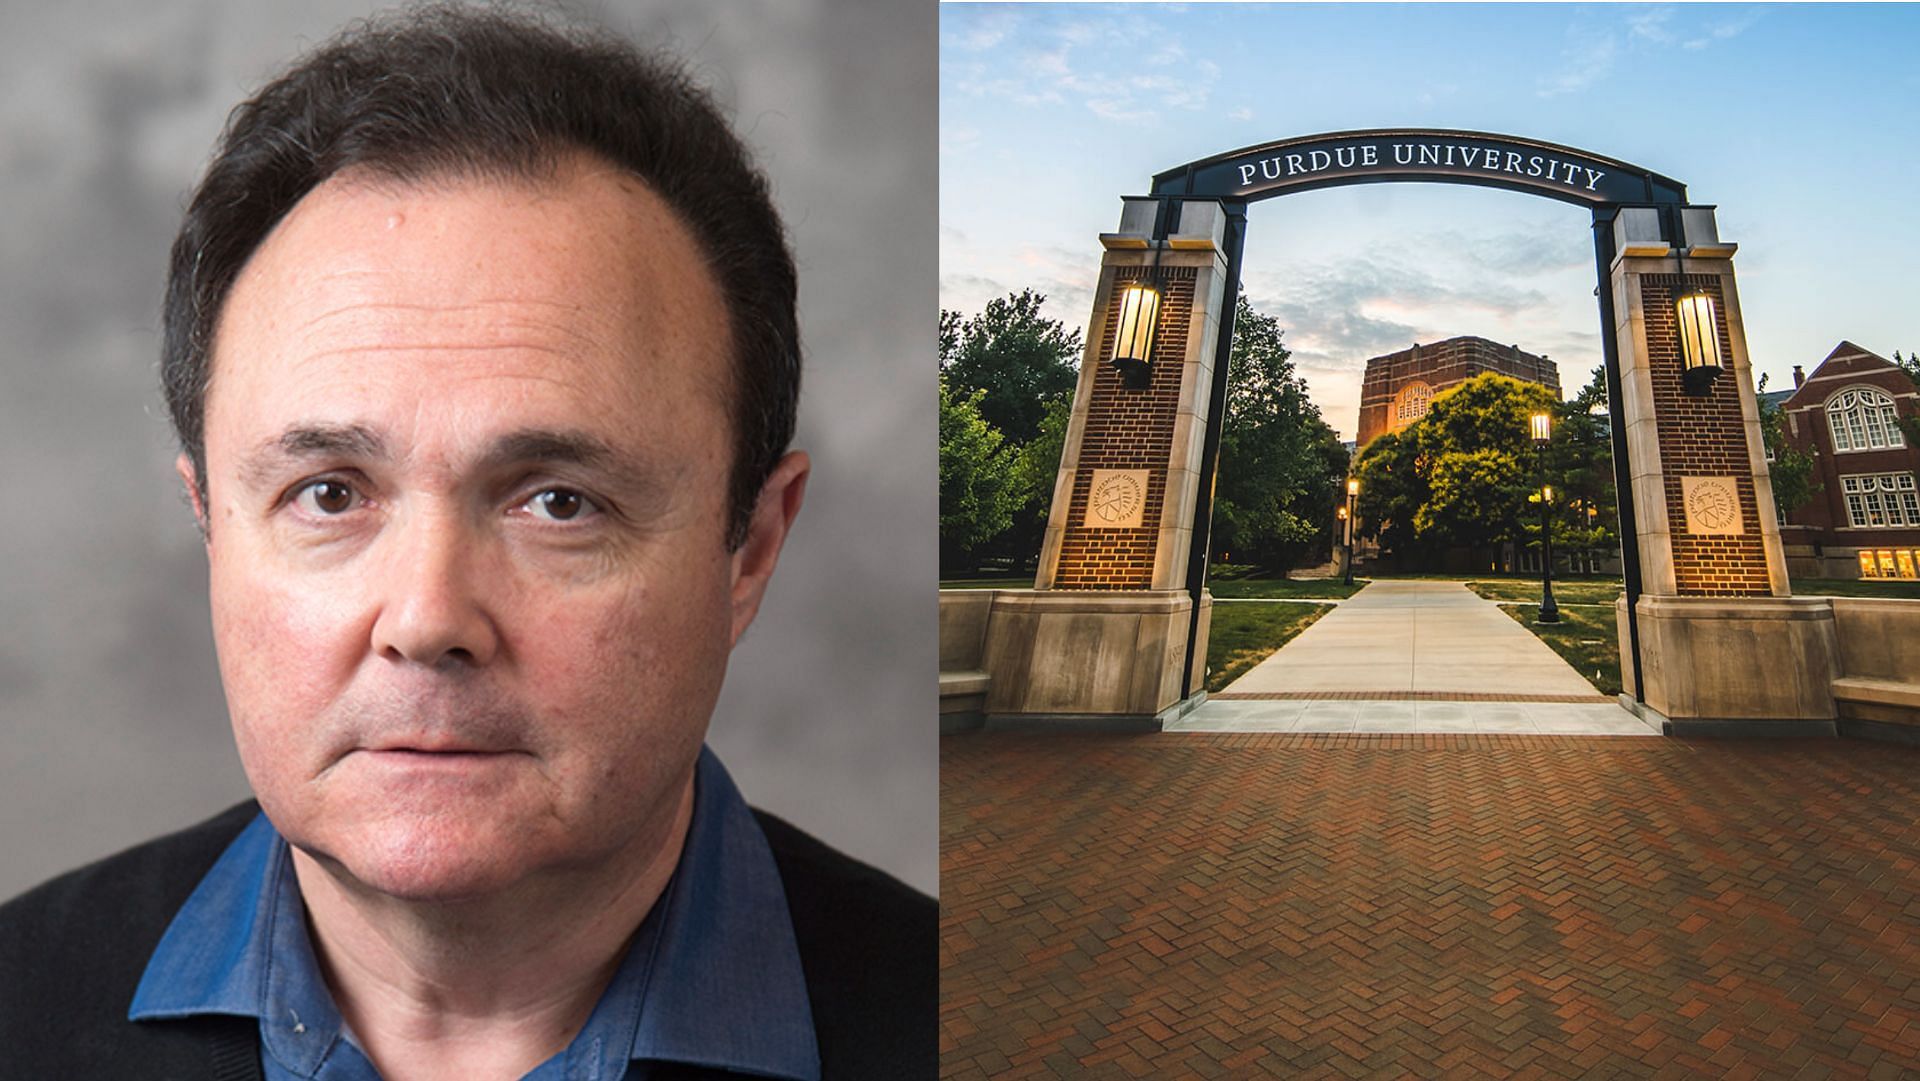 Purdue University professor Sergey Macheret was arrested on Wednesday on charges of drug-dealing and s**ual misconduct. (Image via engineering.purdue.edu, purdue.edu)